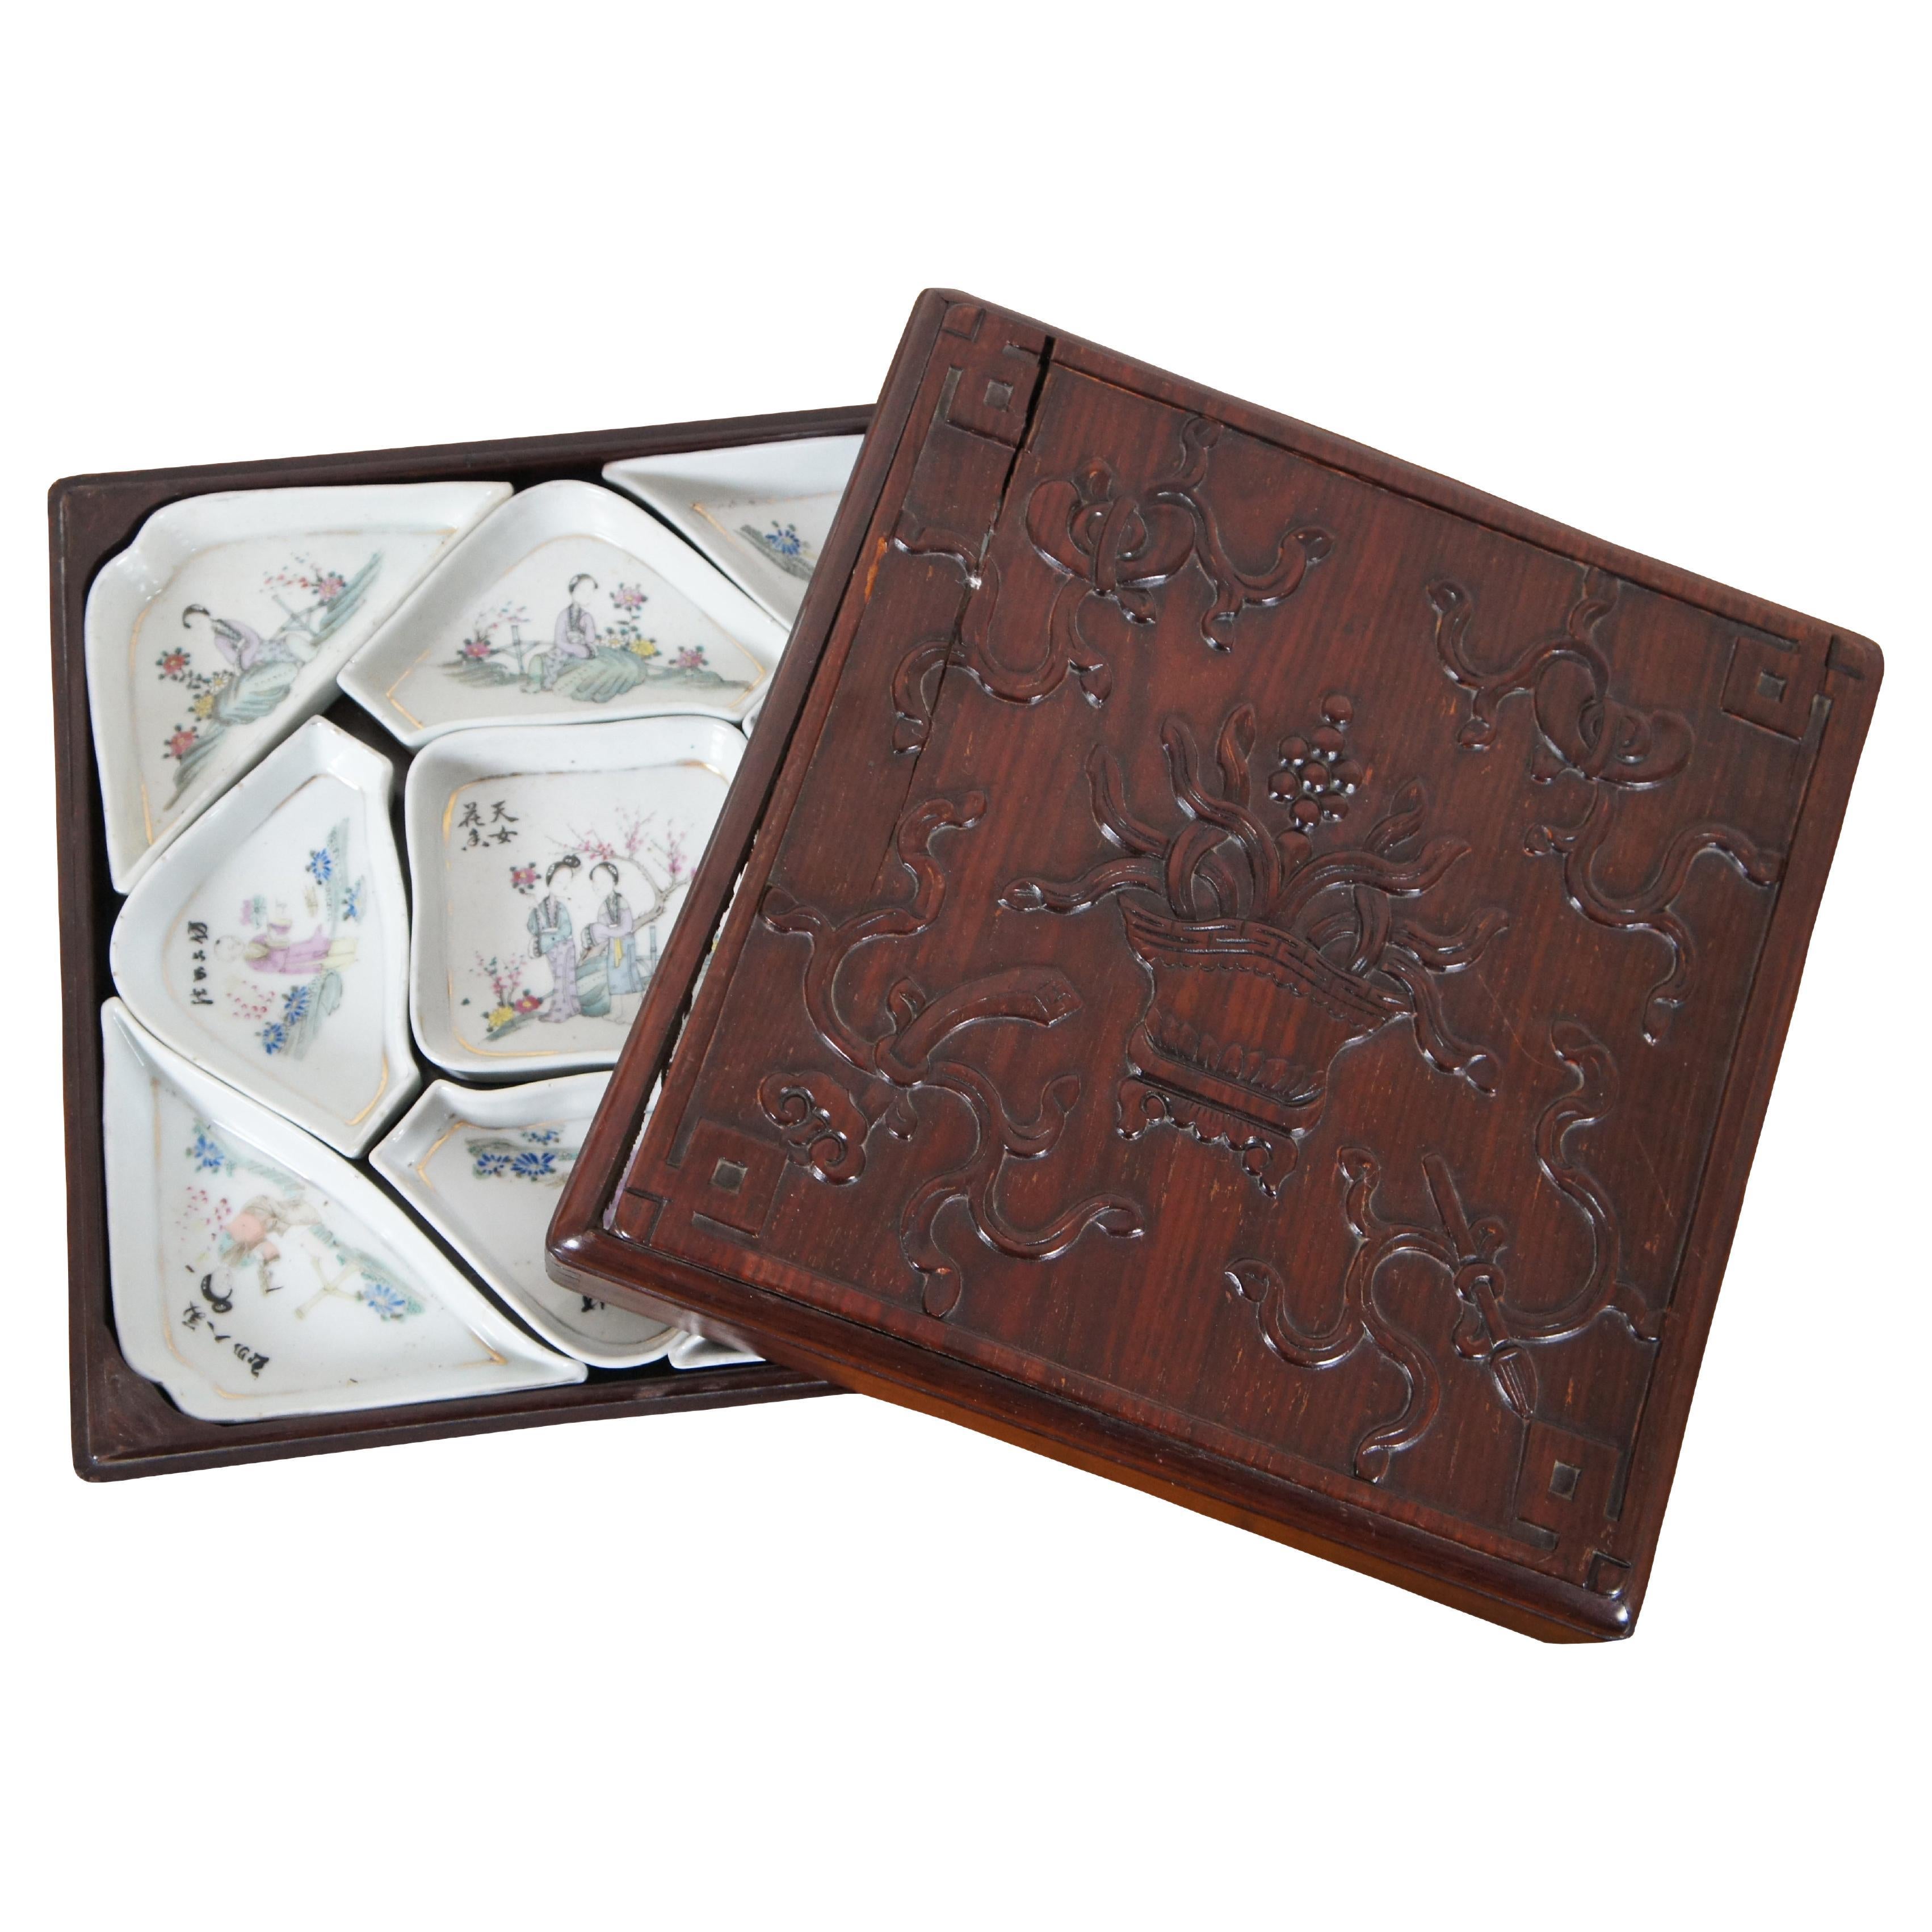 Antique 19th century Chinese Export, famille rose porcelain sweet meat / hors d’oeuvre dishes in a Rosewood box elegantly carved with ribbons and a basket of flowers. Features 9 dishes arranged geometrically with scenes of Geishas and Scholars.